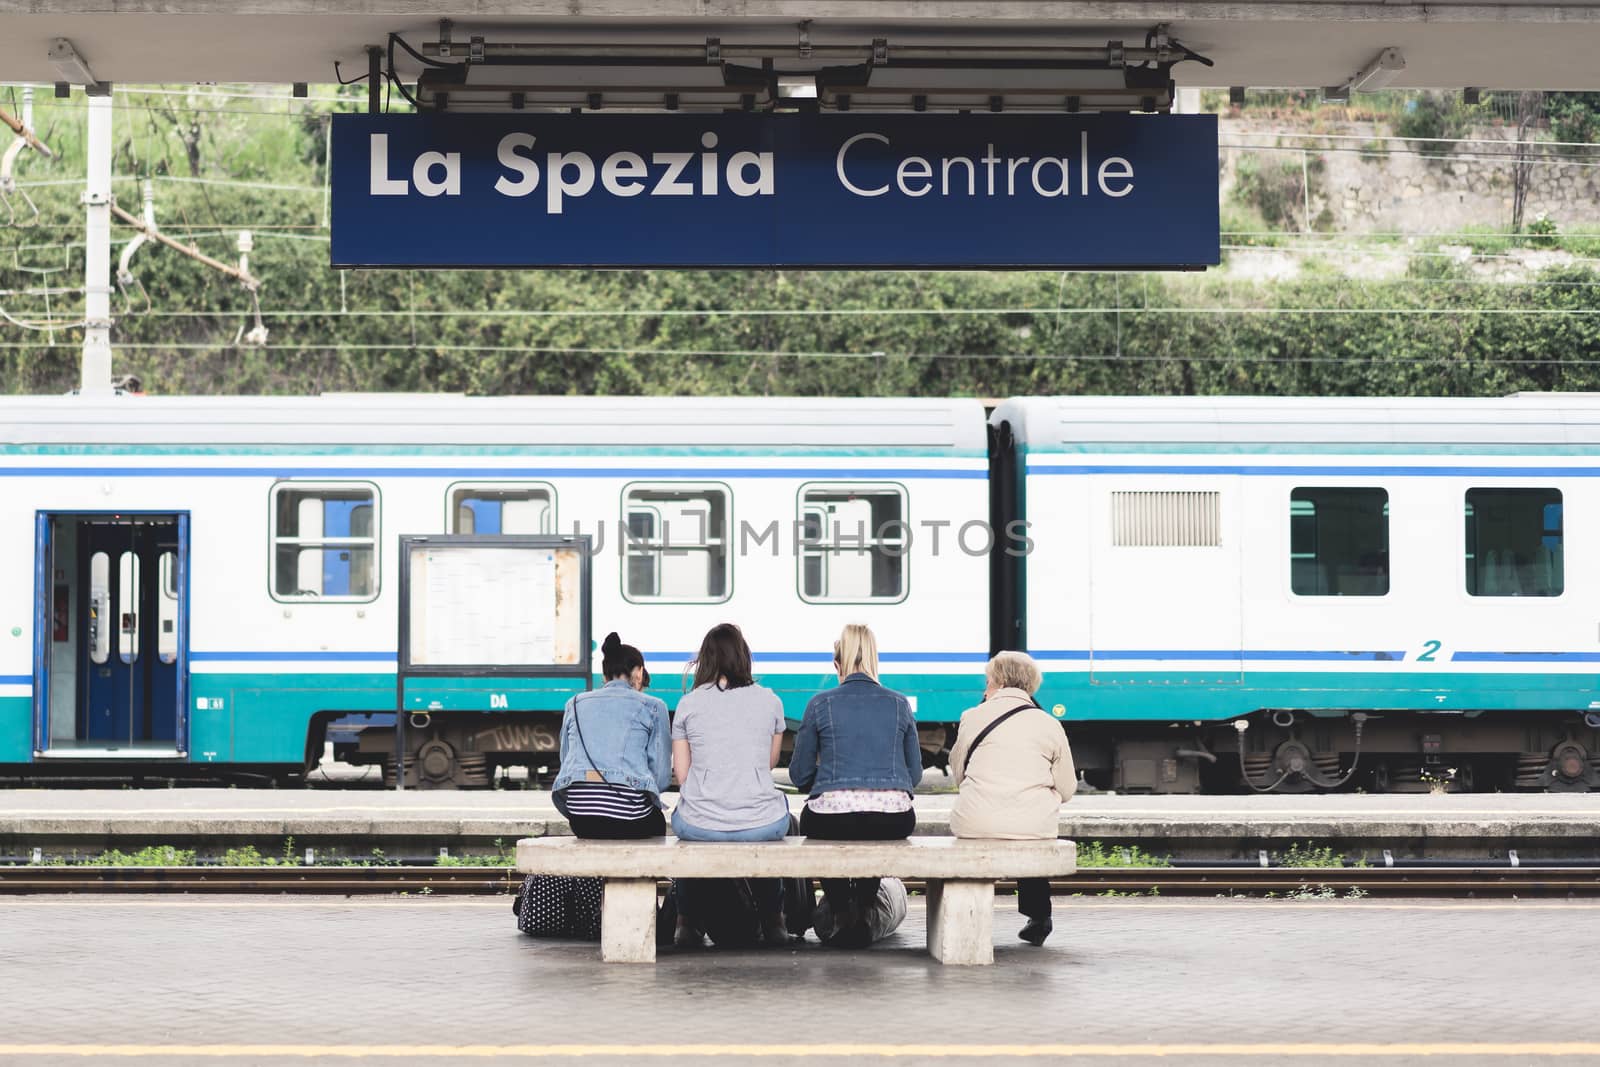 La Spezia, Italy - Apr 8, 2016: Unidentified four European female travelers, young and senior, wait for train at La Spezia Central public train station, visiting Cinque Terre, Italy by beer5020